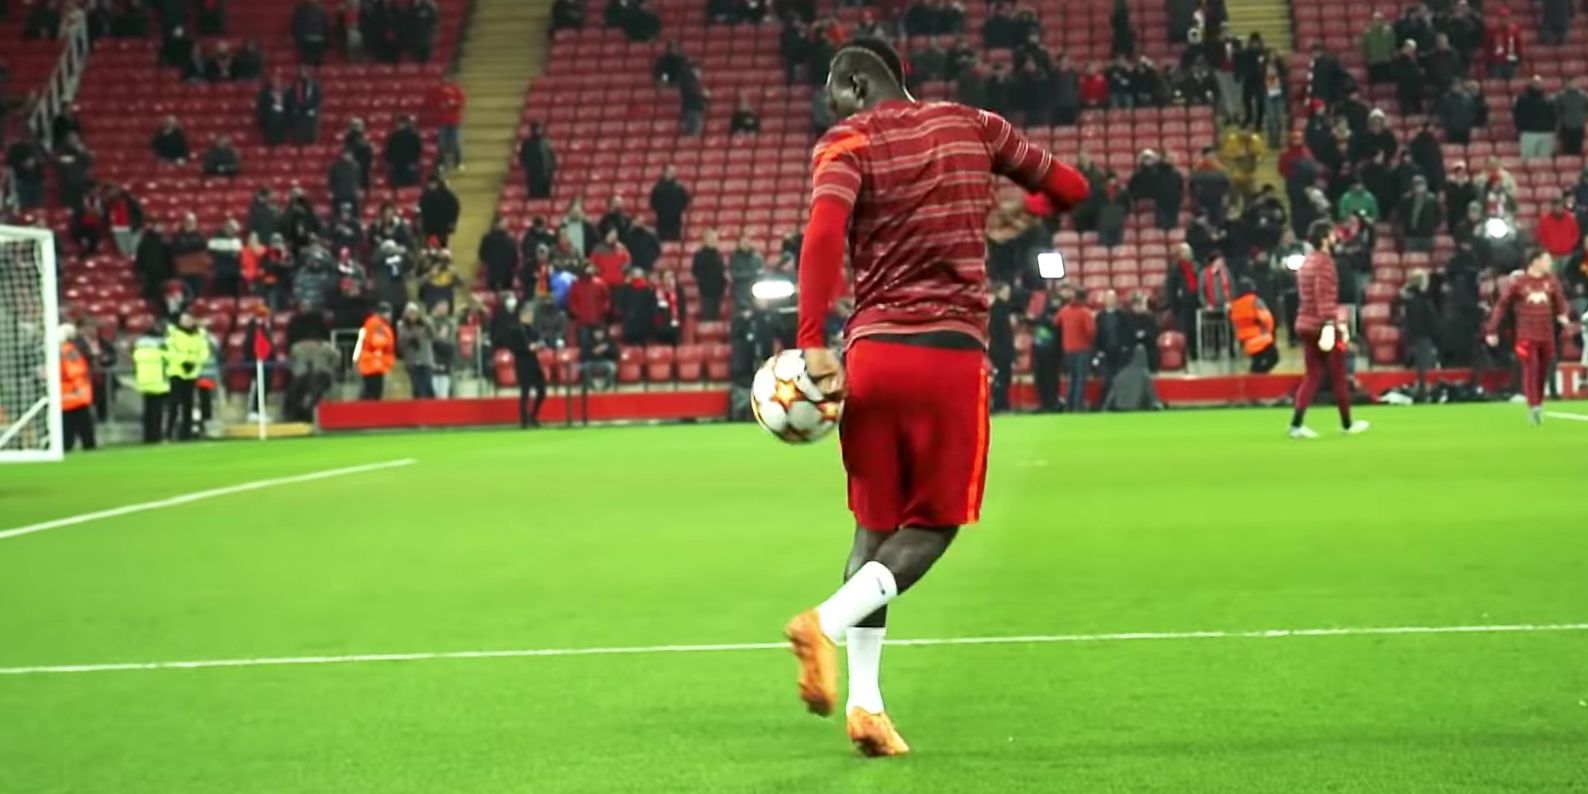 (Video) Sadio Mane shows off his skills at Anfield before kick-off against Inter Milan